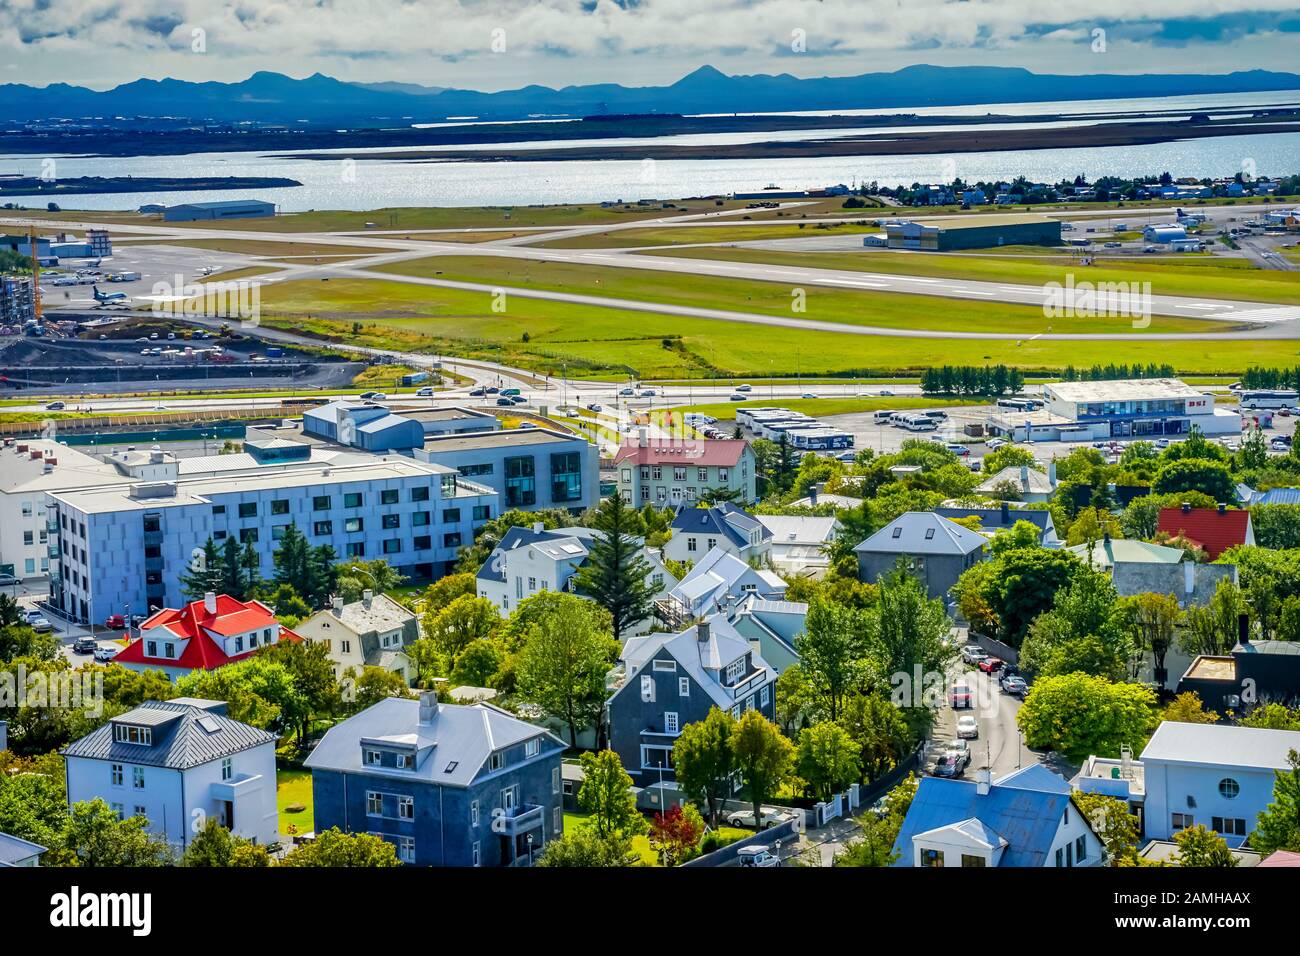 Airport Ocean Colorful Red Blue Houses Cars Streets Reykjavik Iceland Stock Photo